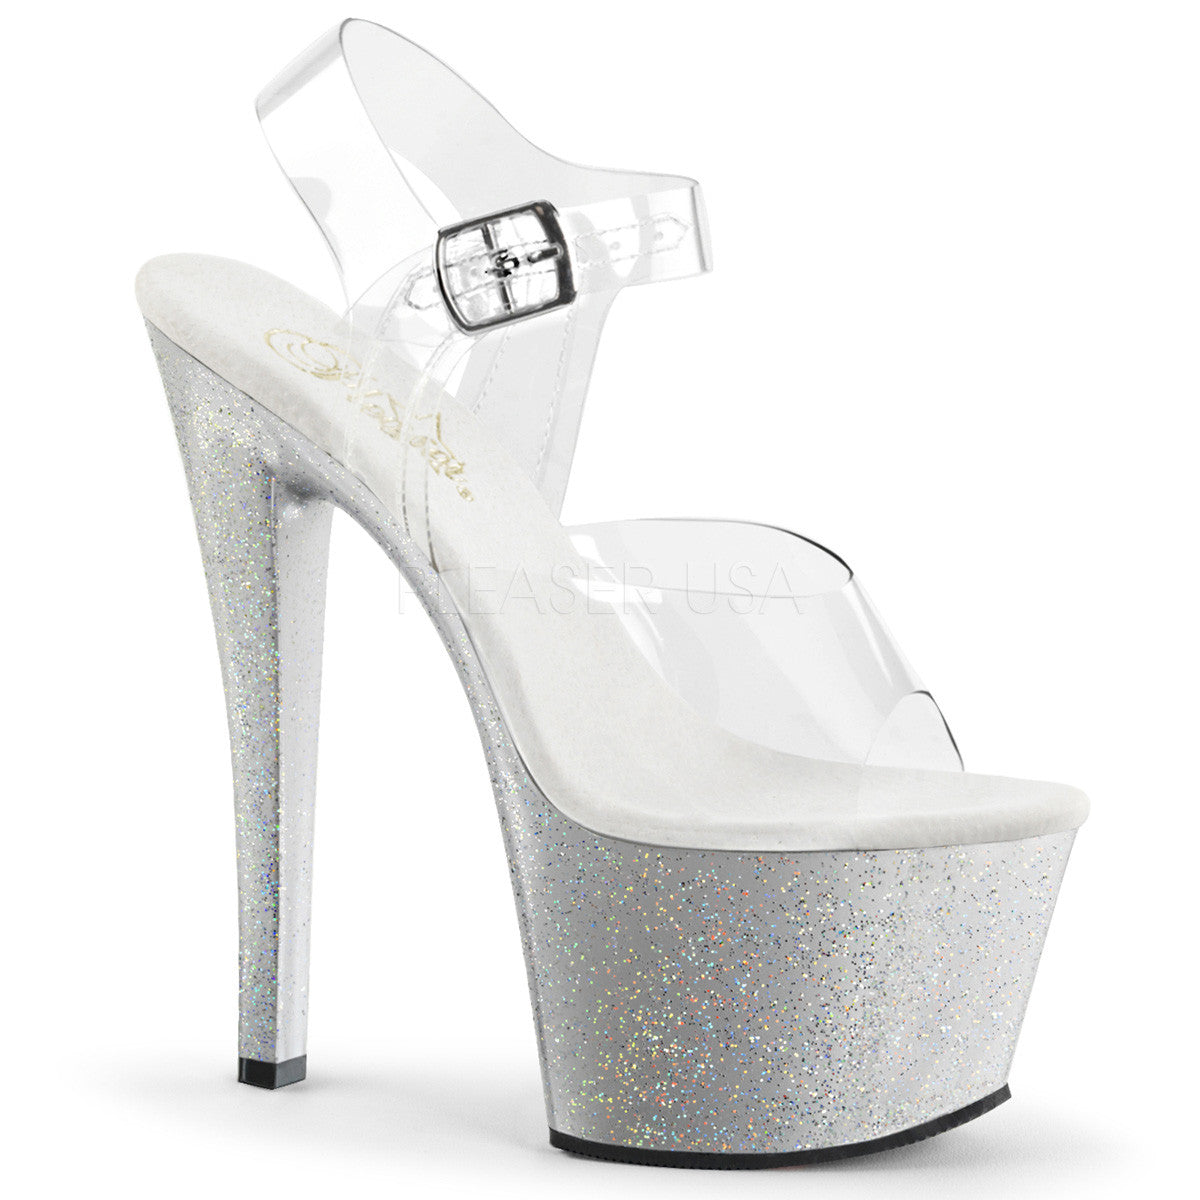 Pleaser SKY-308MG Clear With Silver Glitter Platform Ankle Strap Sandals - Shoecup.com